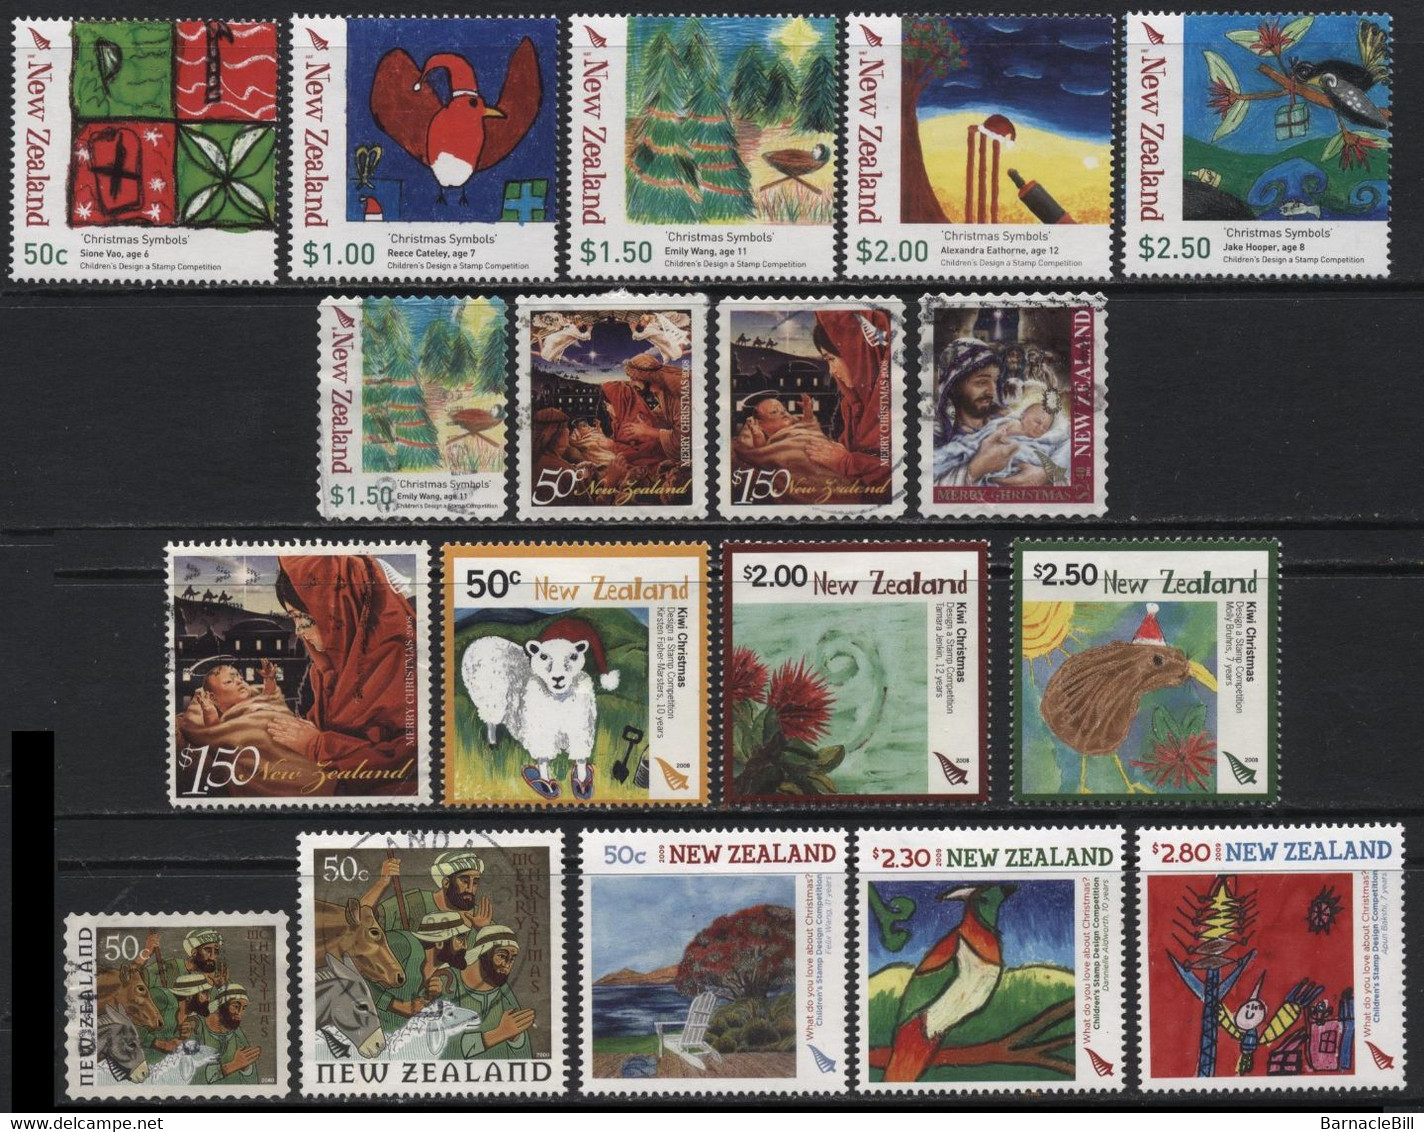 New Zealand (01) about 180 different Christmas stamps 1960-2008. Mint & Used. Hinged